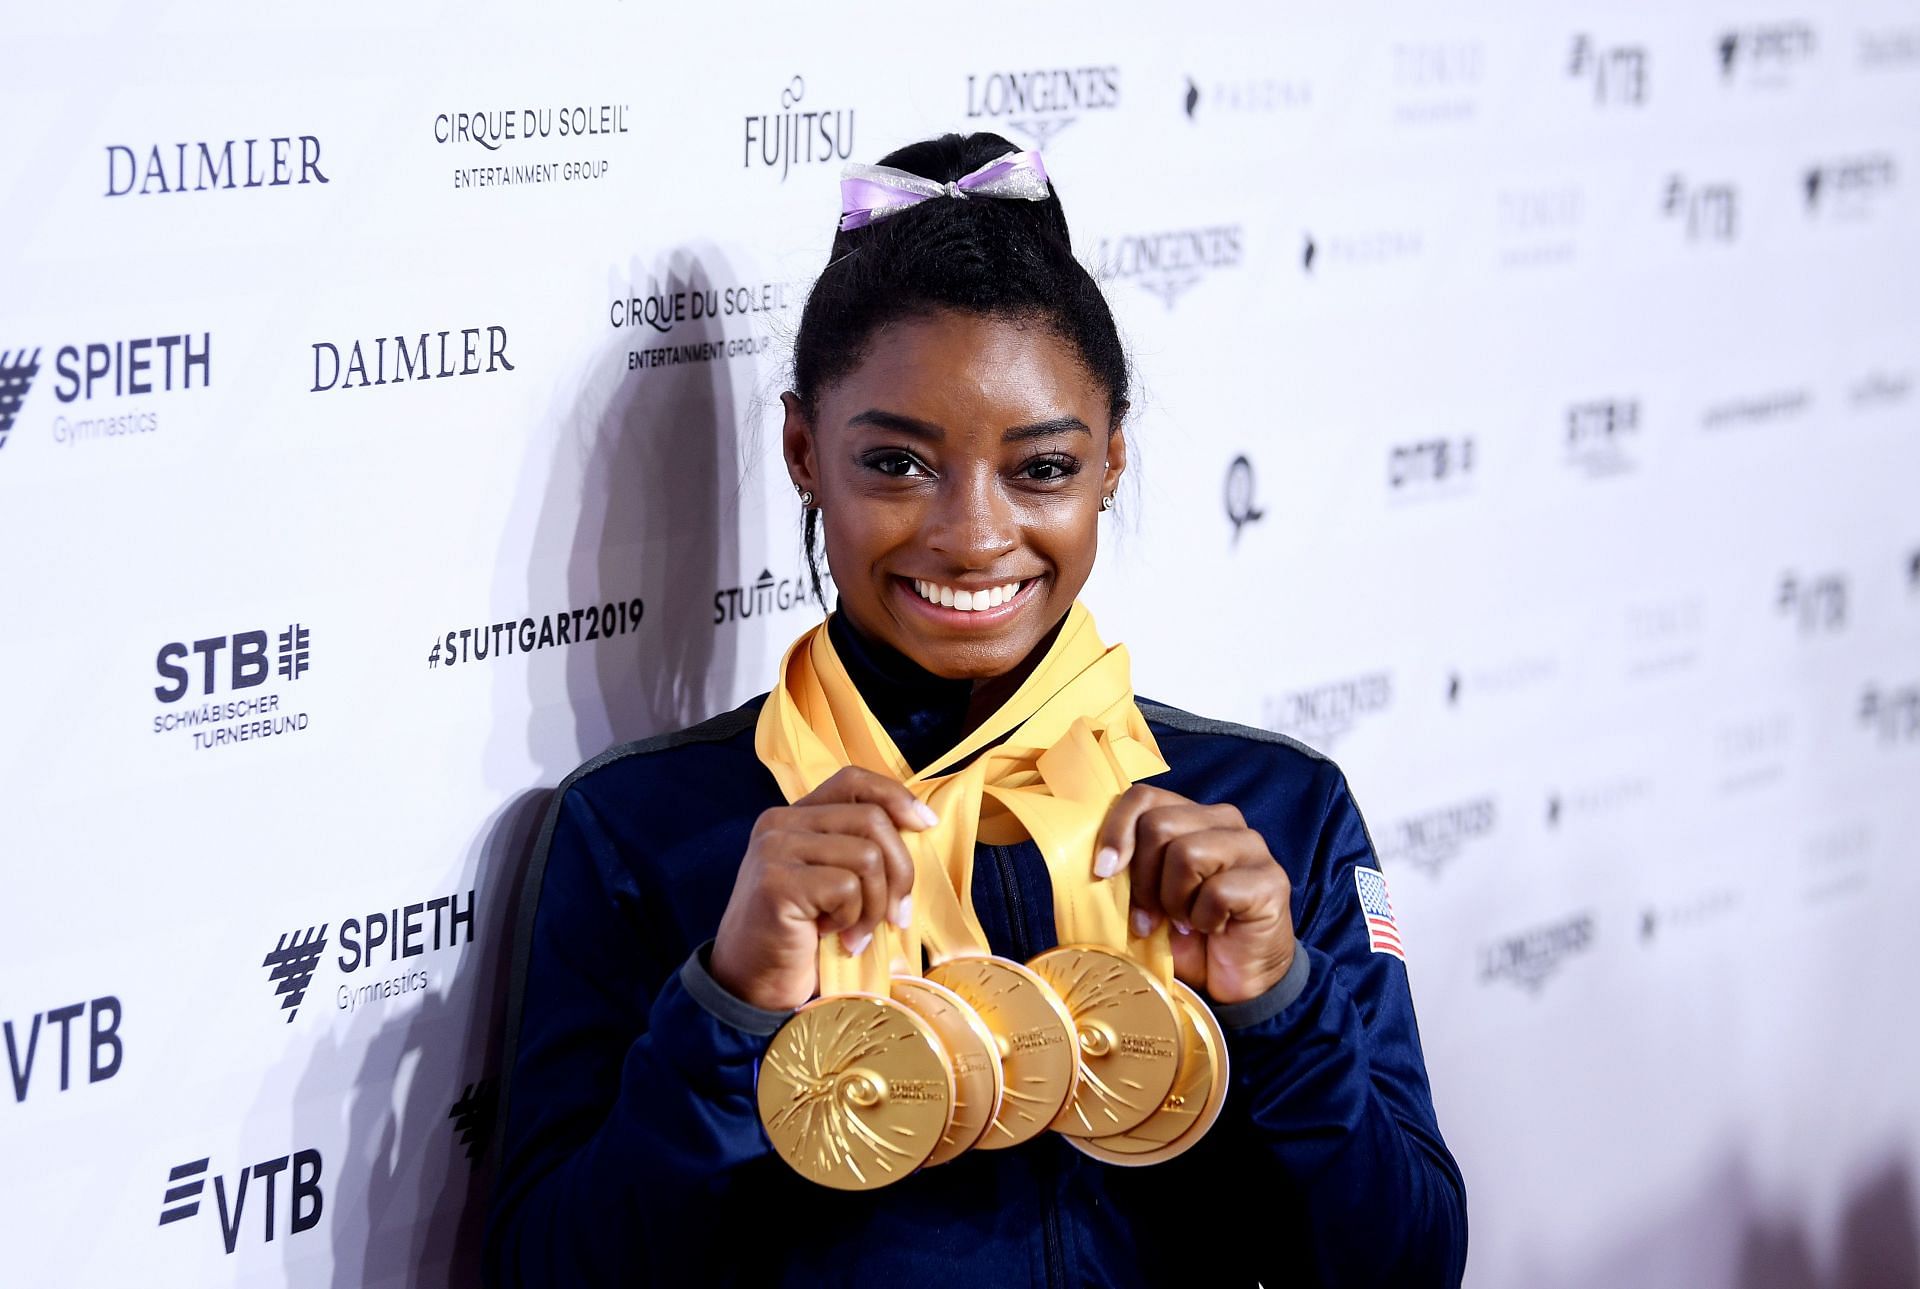 Simone Biles poses with her multiple gold medals during day 10 of the 49th FIG Artistic Gymnastics World Championships 2019 in Stuttgart, Germany. (Photo by Laurence Griffiths/Getty Images)